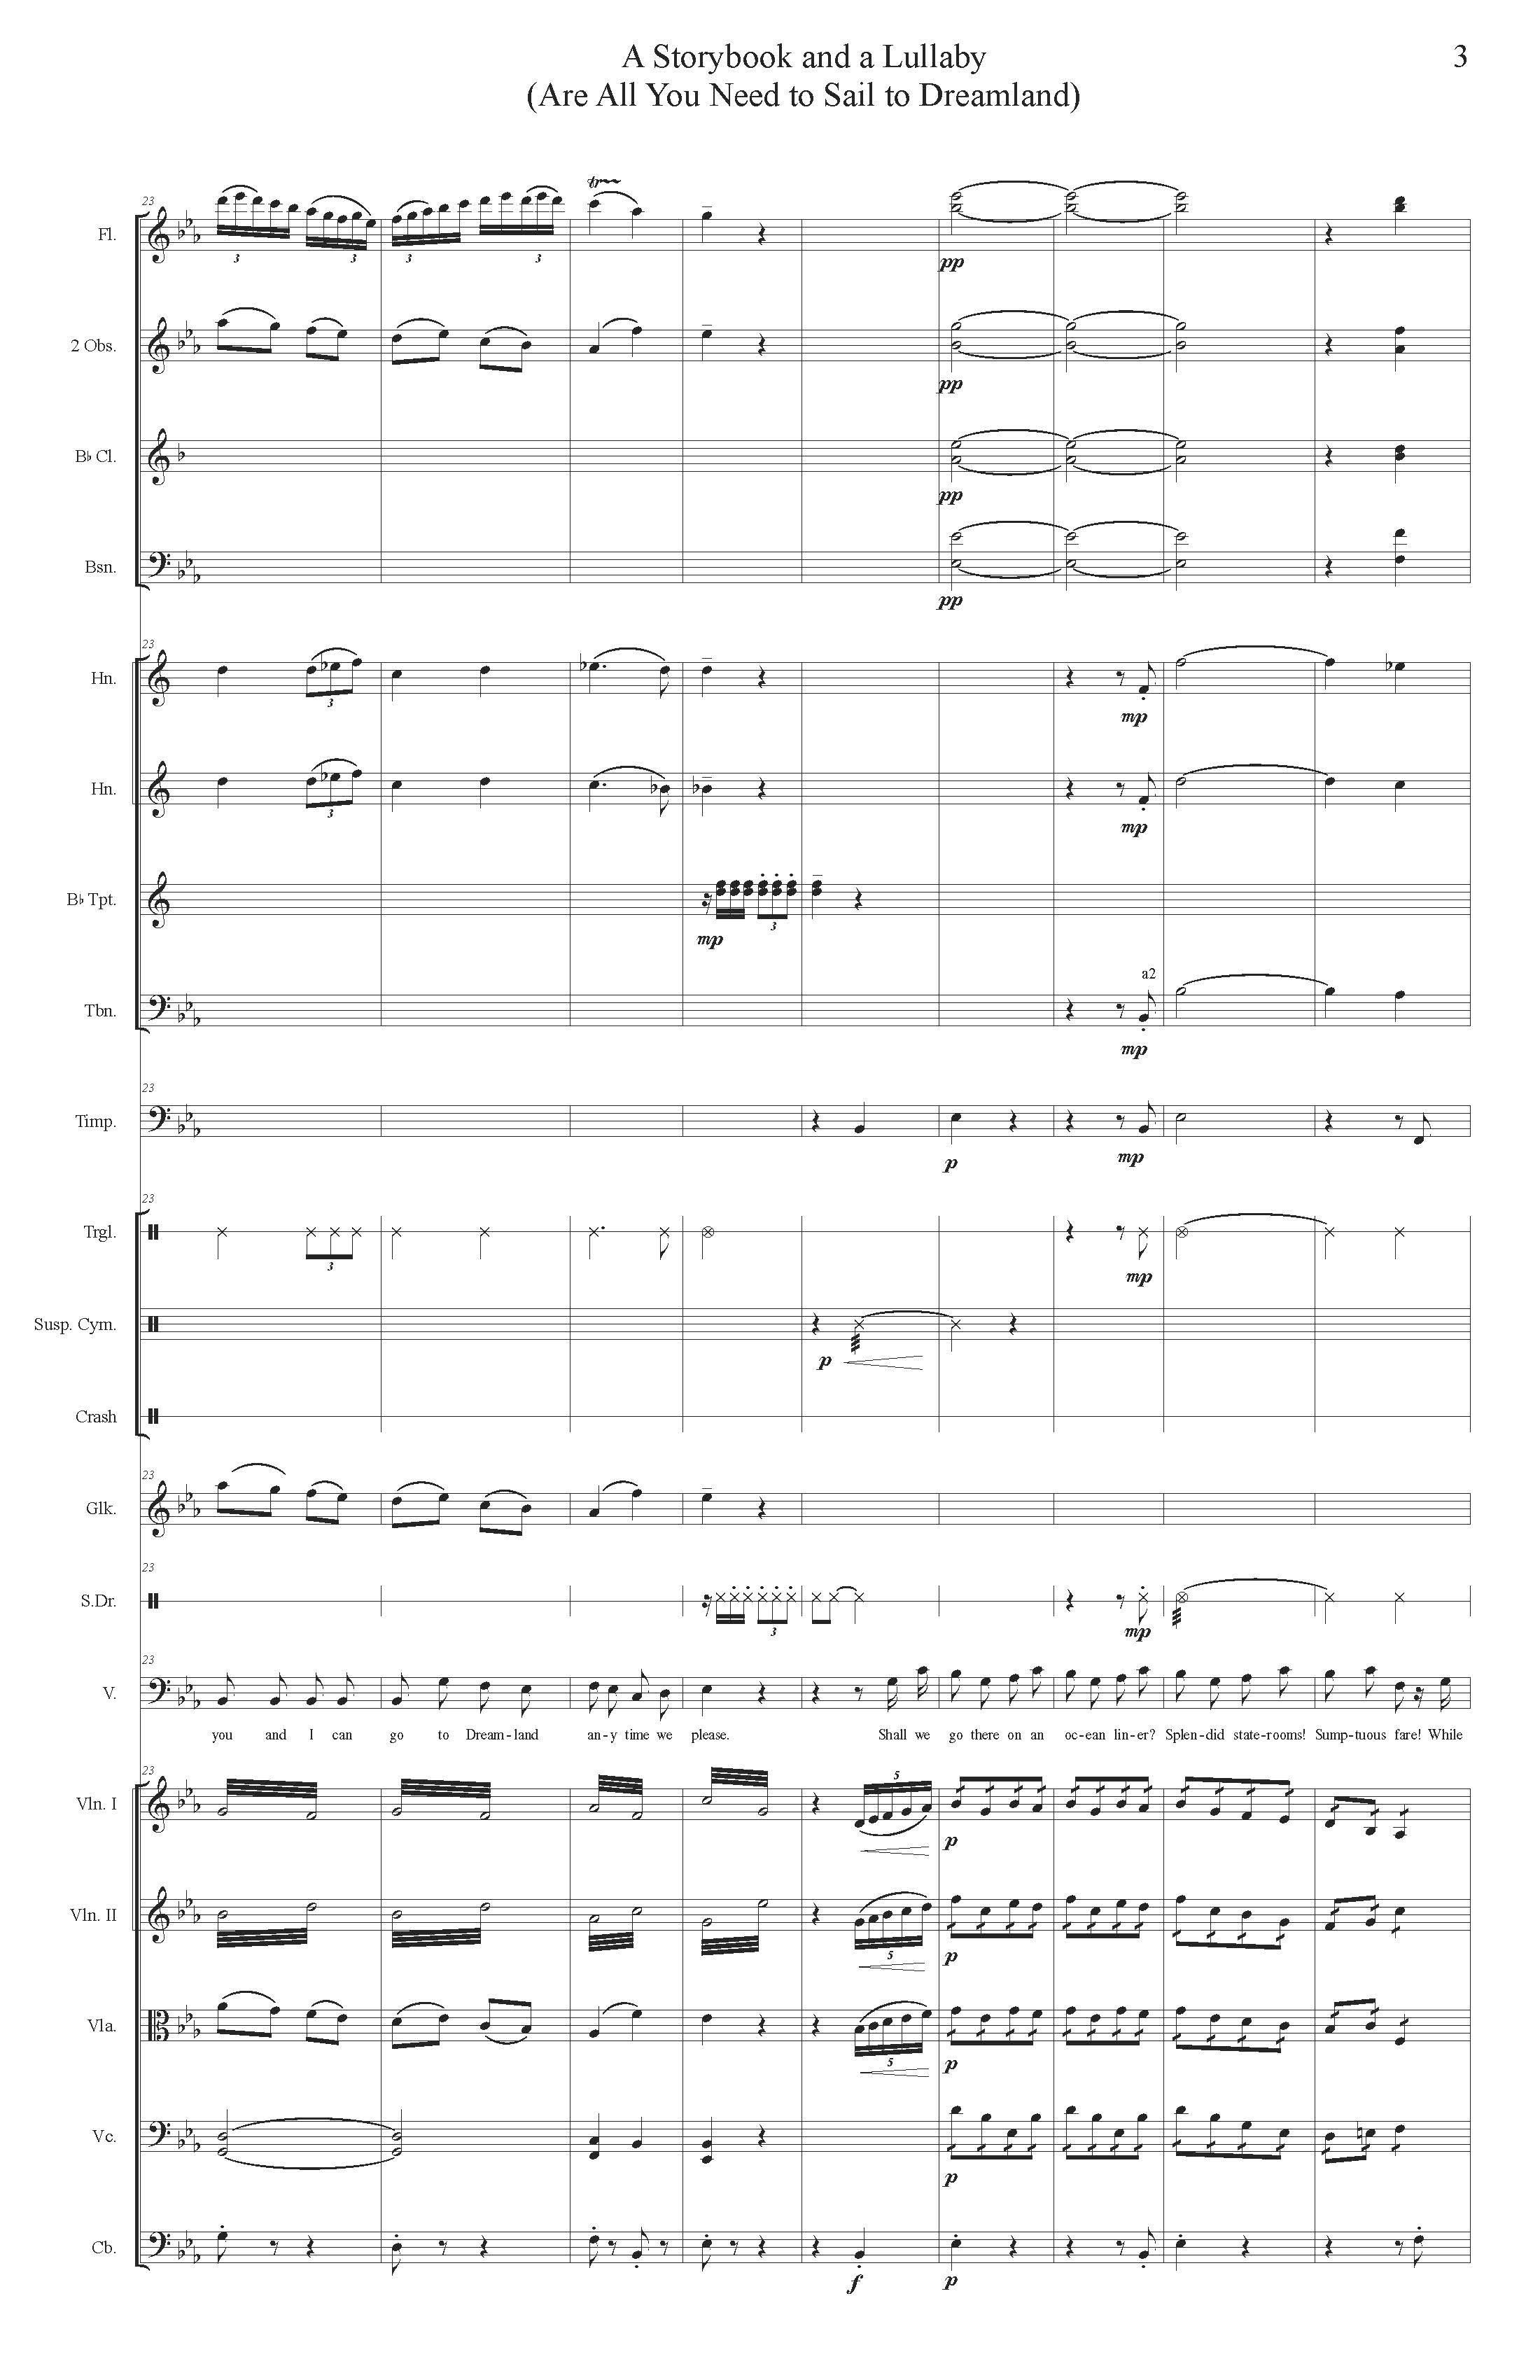 A STORYBOOK AND A LULLABY ORCH - Score_Page_03.jpg